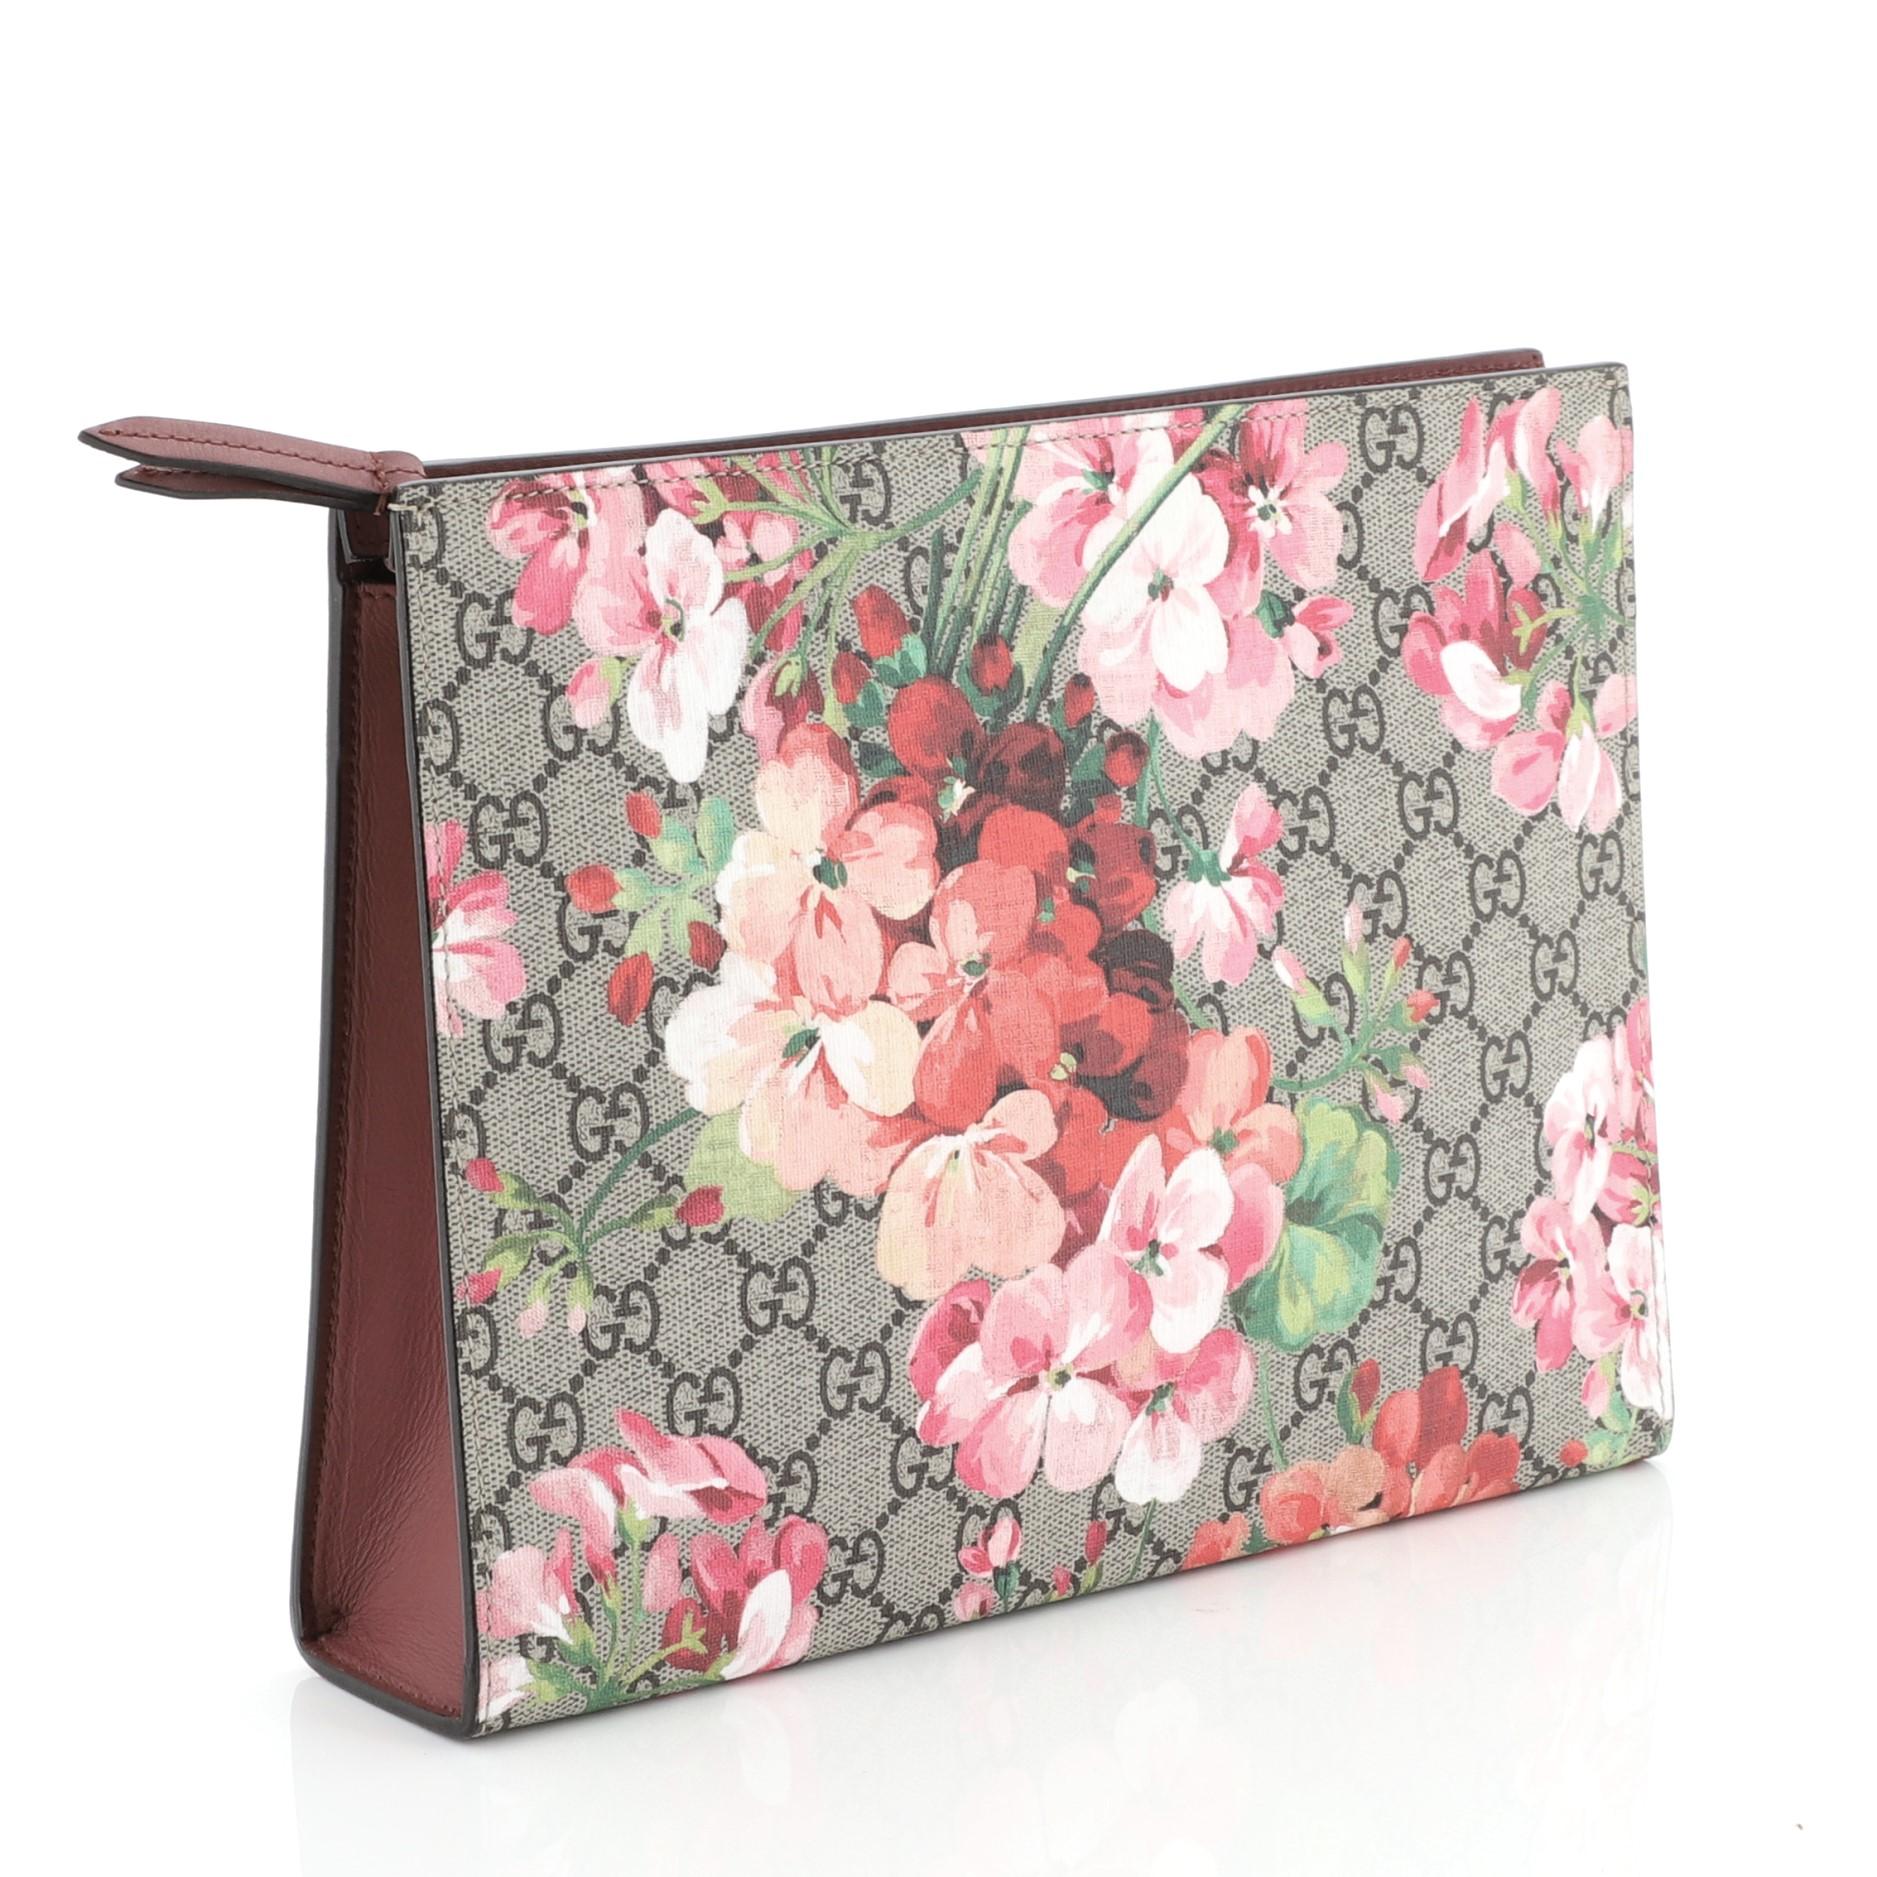 This Gucci Toiletry Pouch Blooms Print GG Coated Canvas Large, crafted from brown GG coated canvas with pink blooms print overlay, features leather sides and silver-tone hardware. Its zip closure opens to a brown satin interior with slip